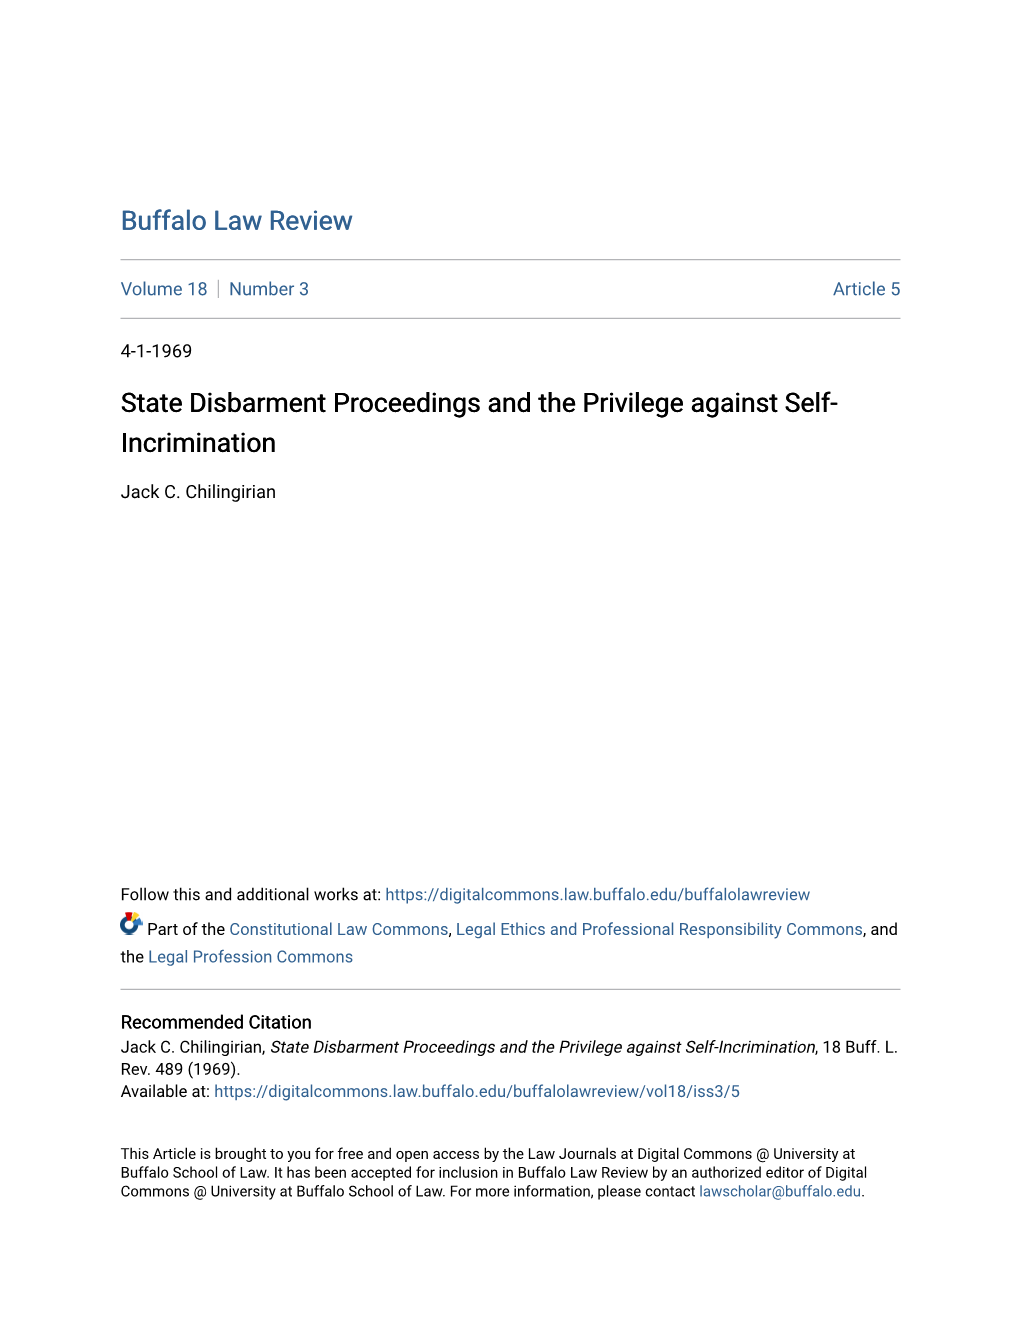 State Disbarment Proceedings and the Privilege Against Self- Incrimination